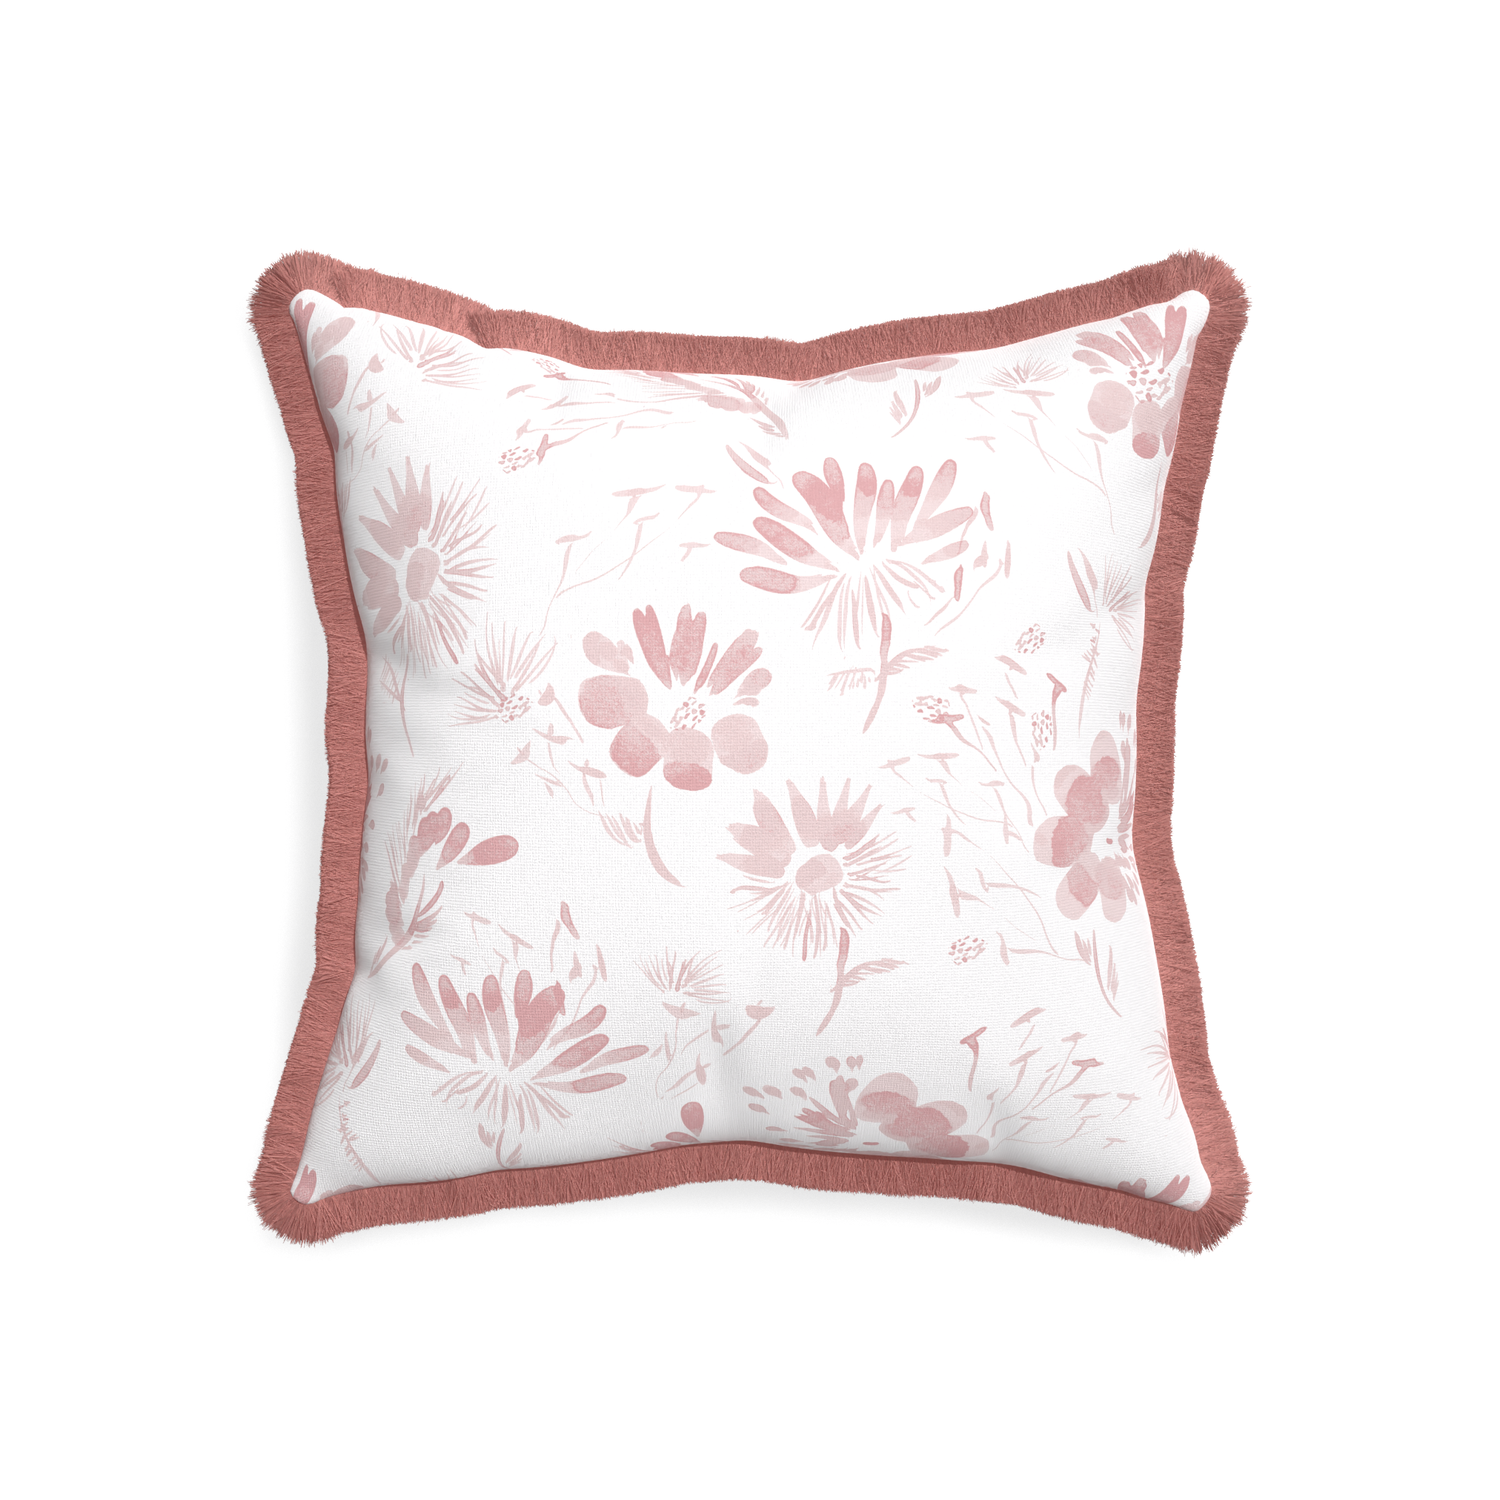 20-square blake custom pink floralpillow with d fringe on white background